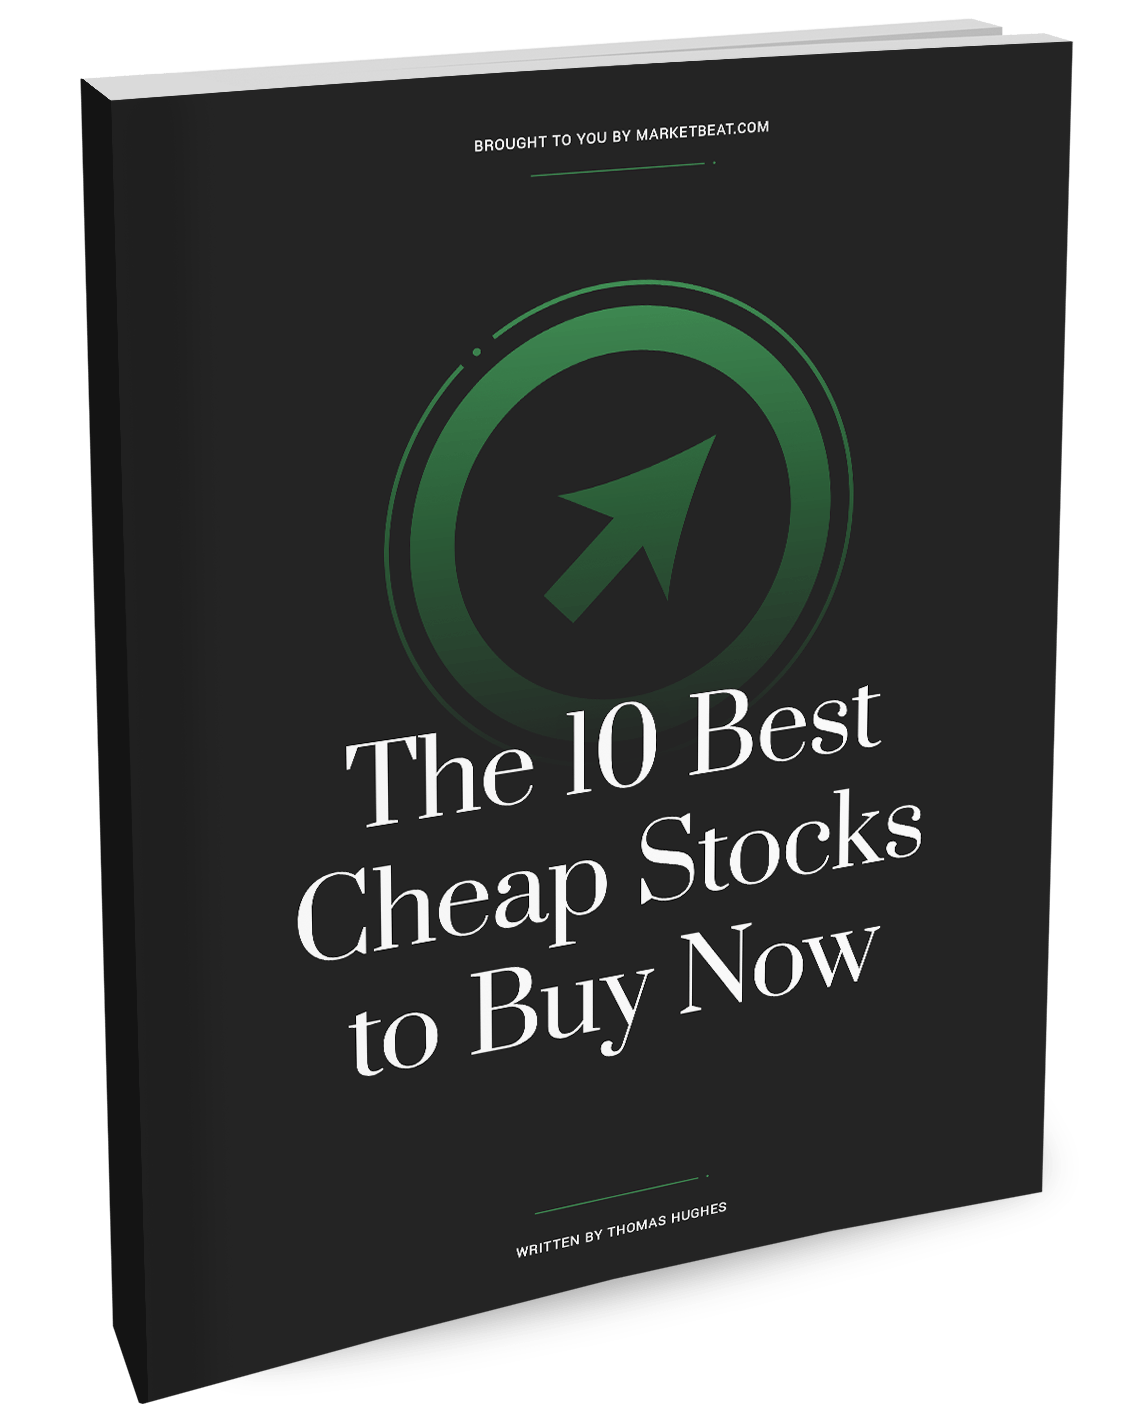 Top 10 Cheap Stocks to Buy Now, cover